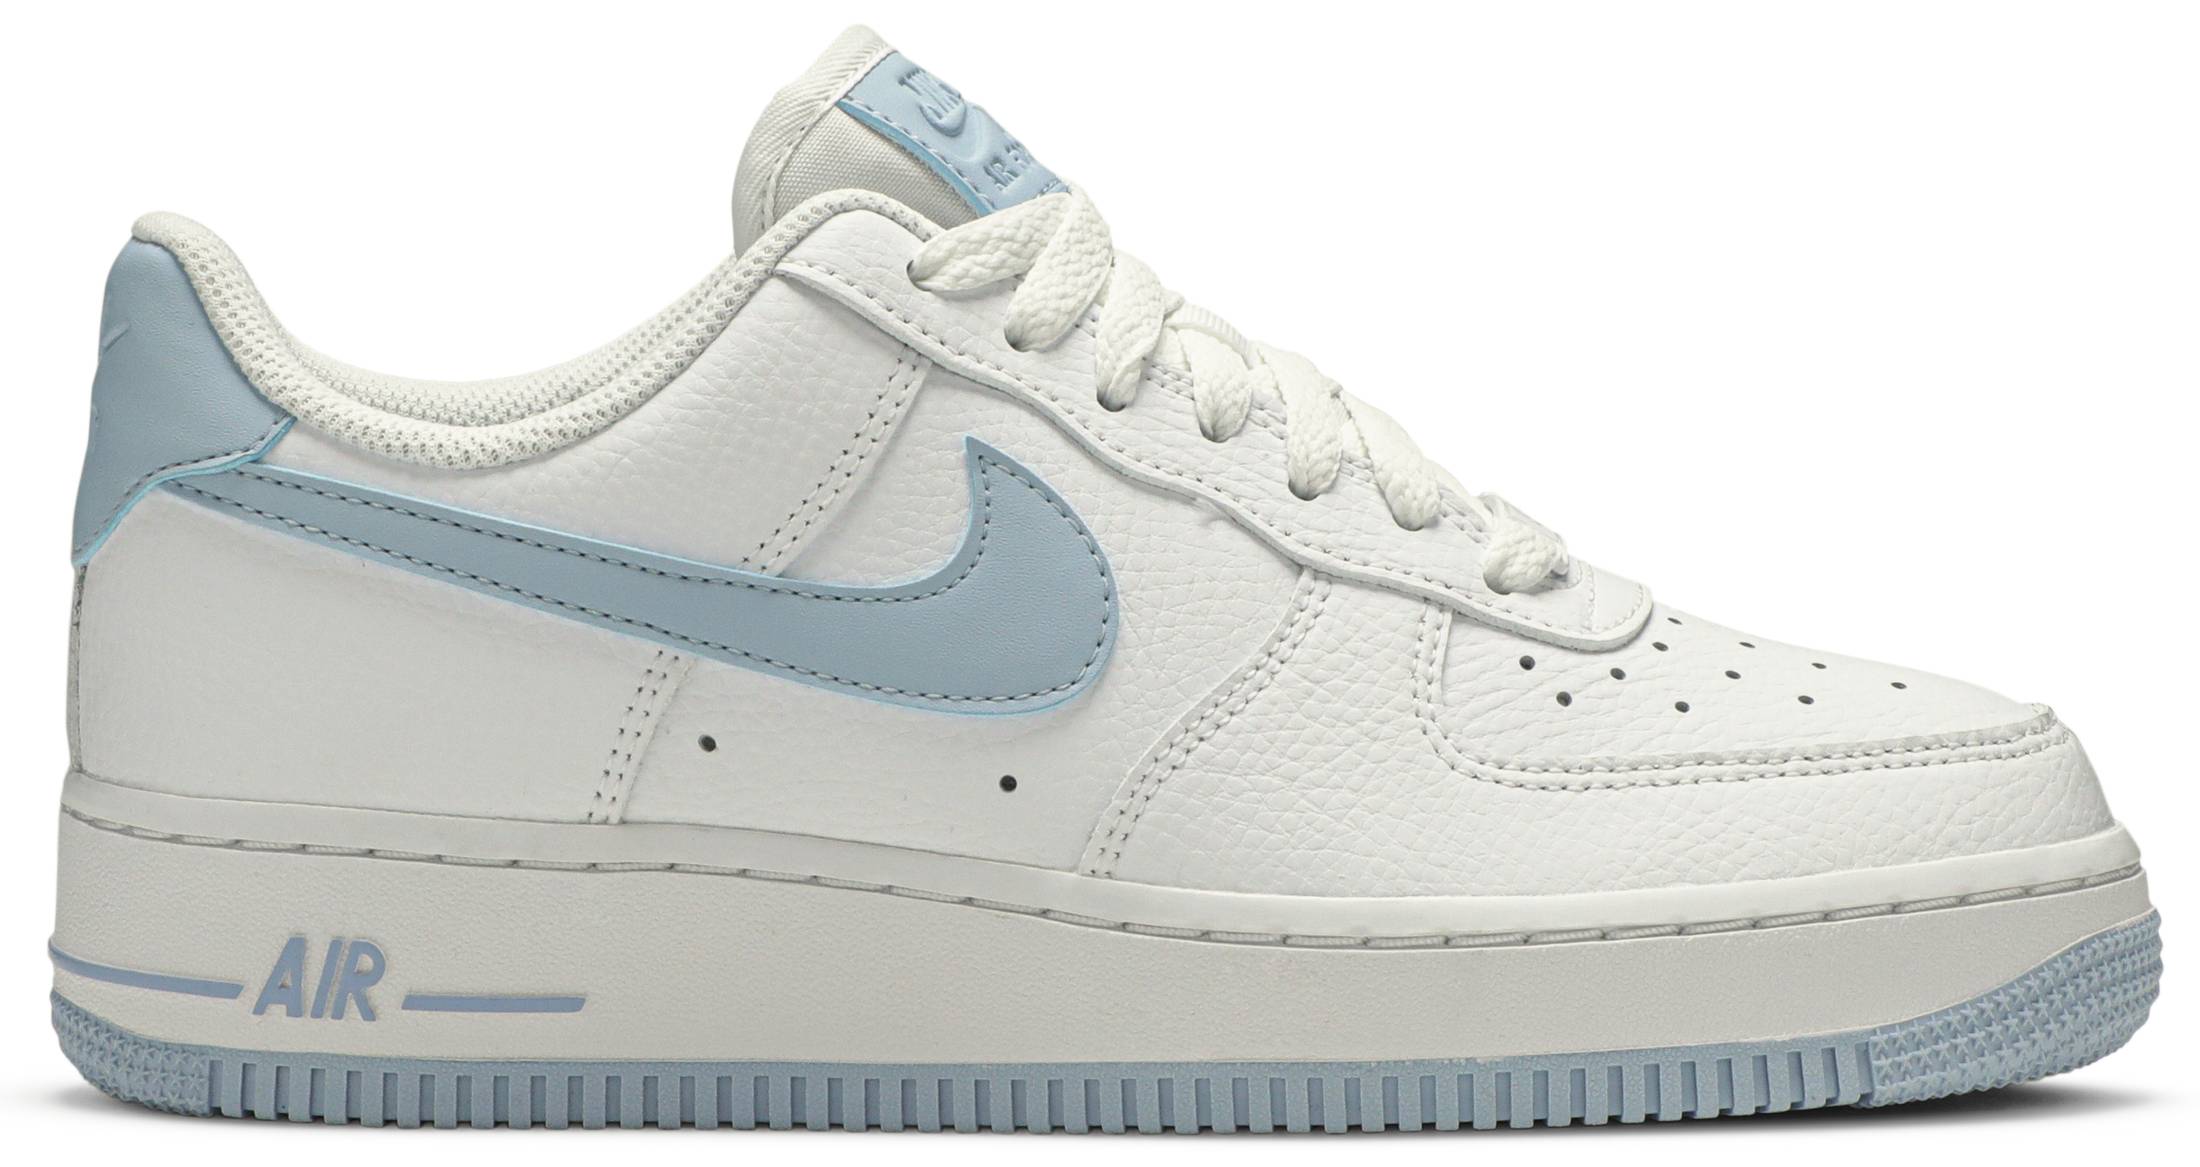 Wmns Air Force 1 Low '07 Patent 'Light Armory Blue' - Nike - AH0287 104 | GOAT